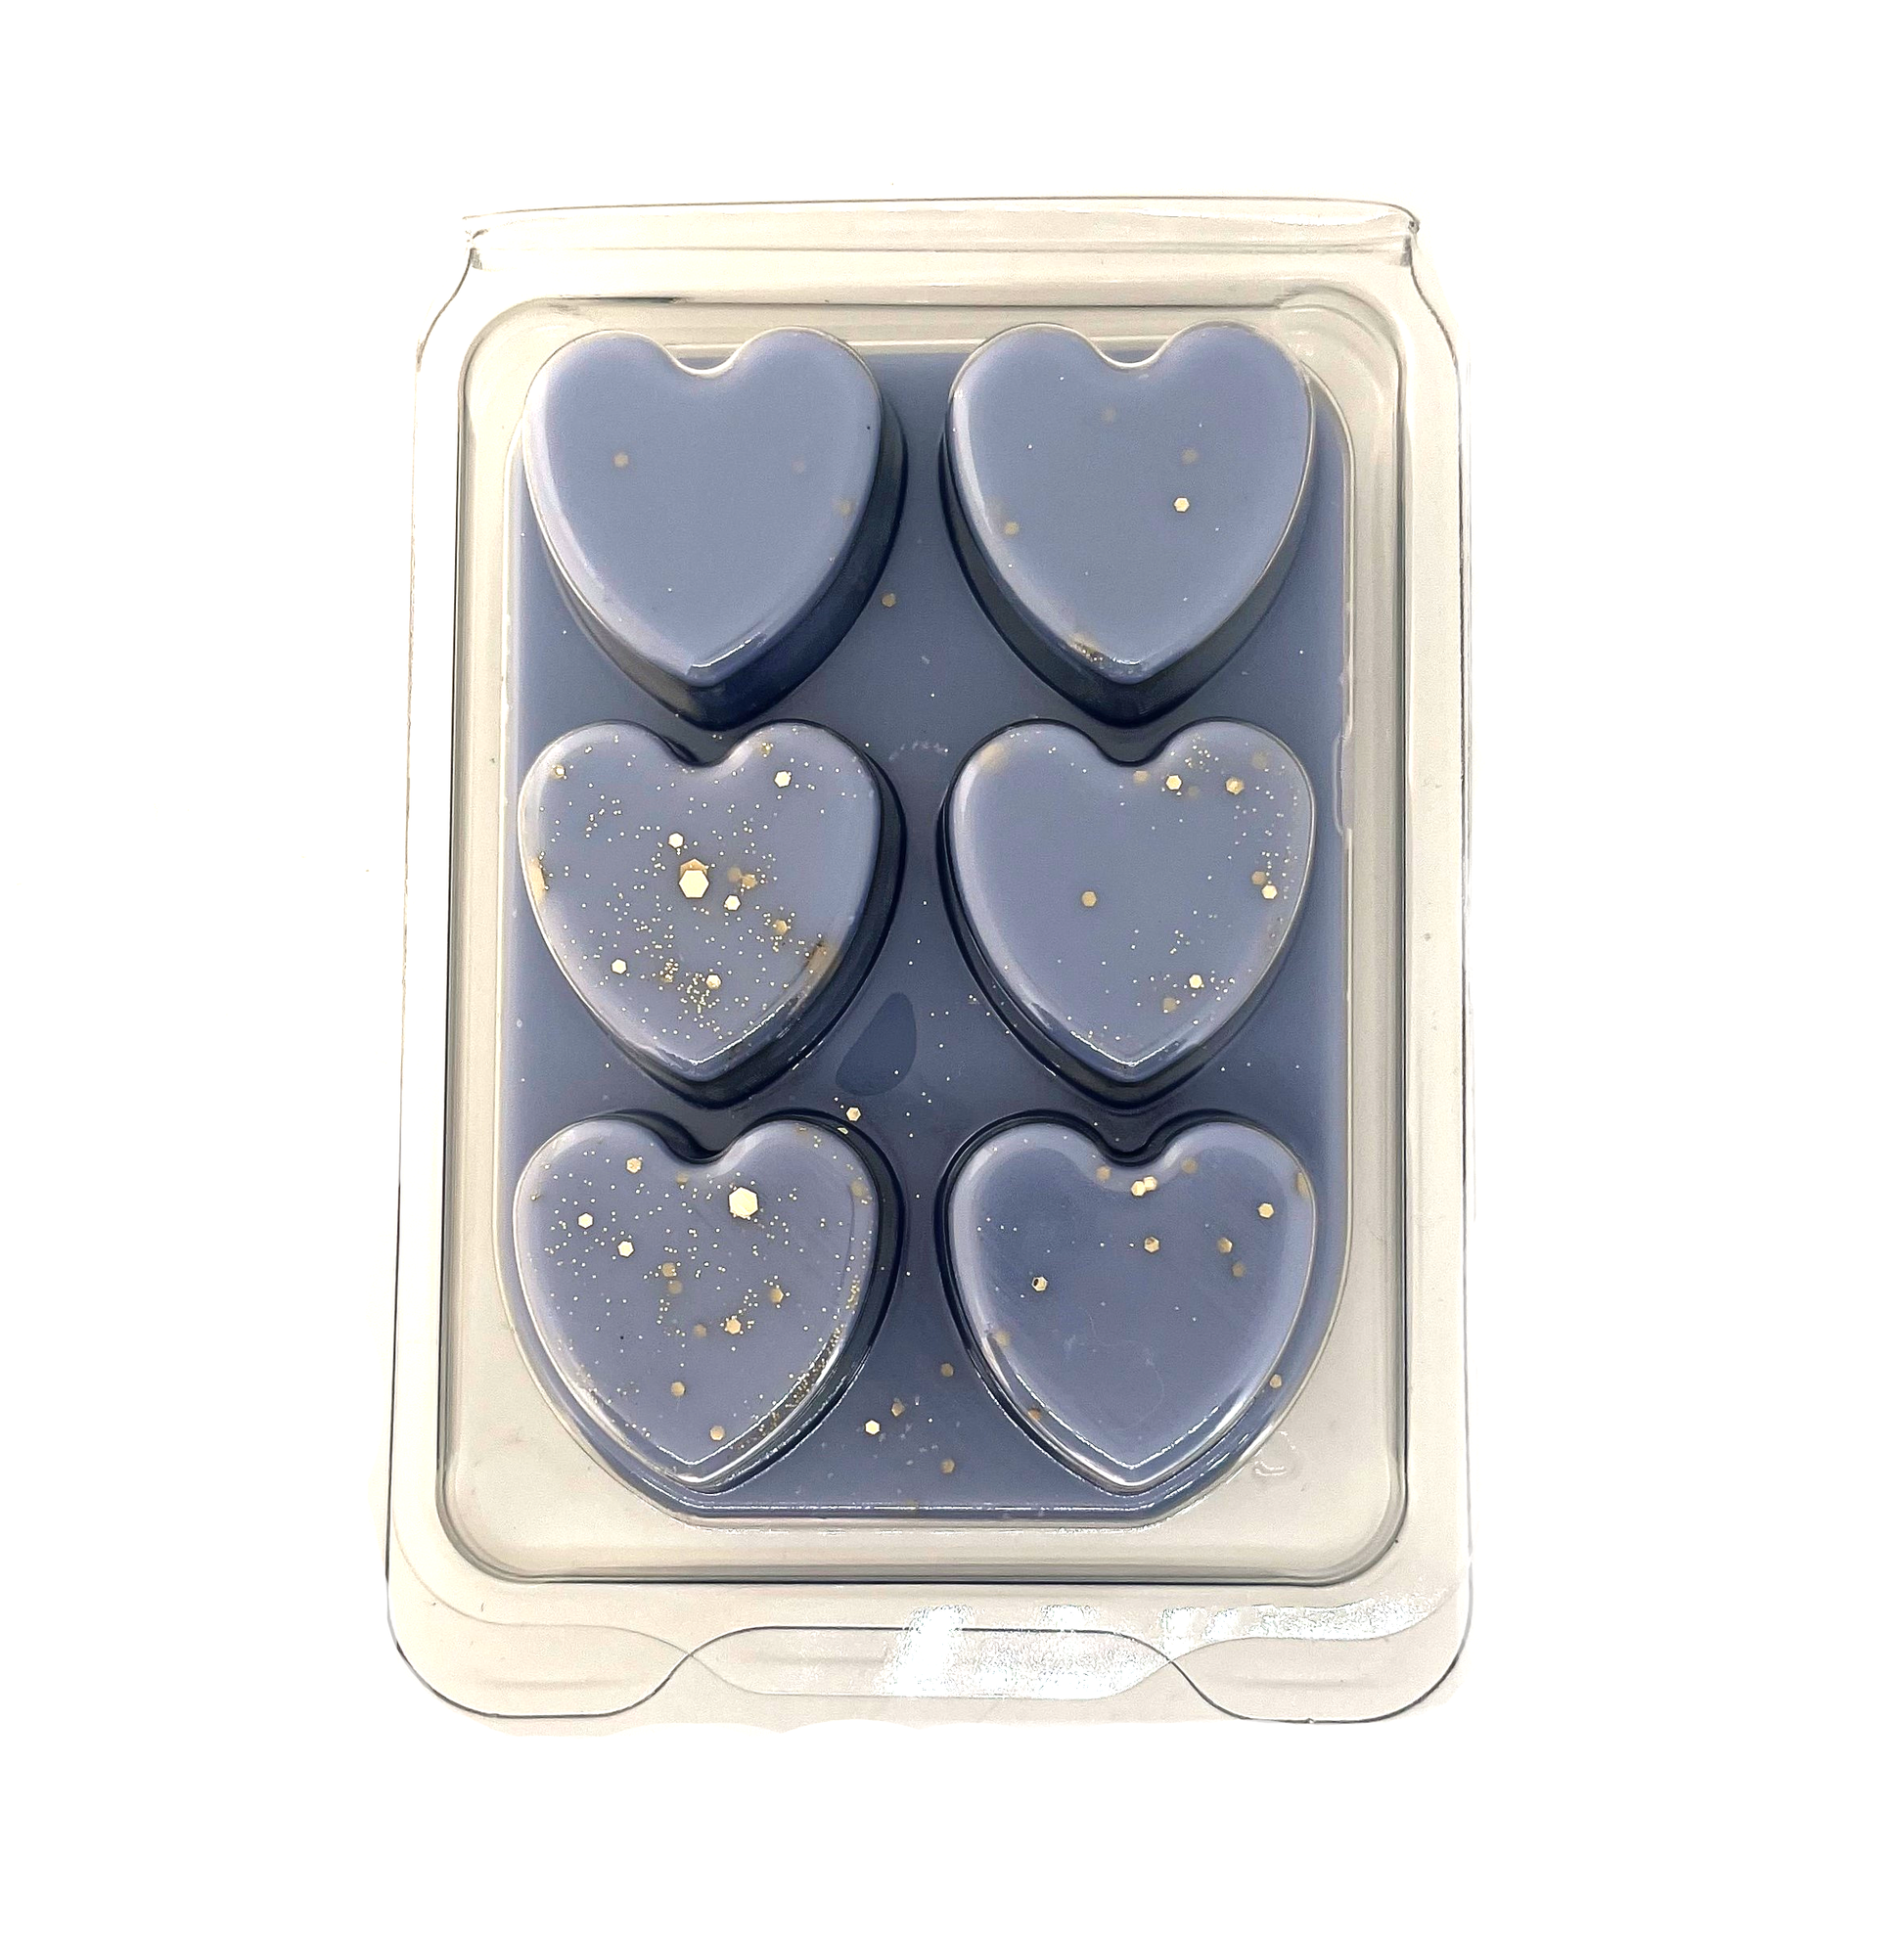 Sauvage Heart Clamshell Wax Melts - ScentiMelti  Sauvage Heart Clamshell Wax Melts